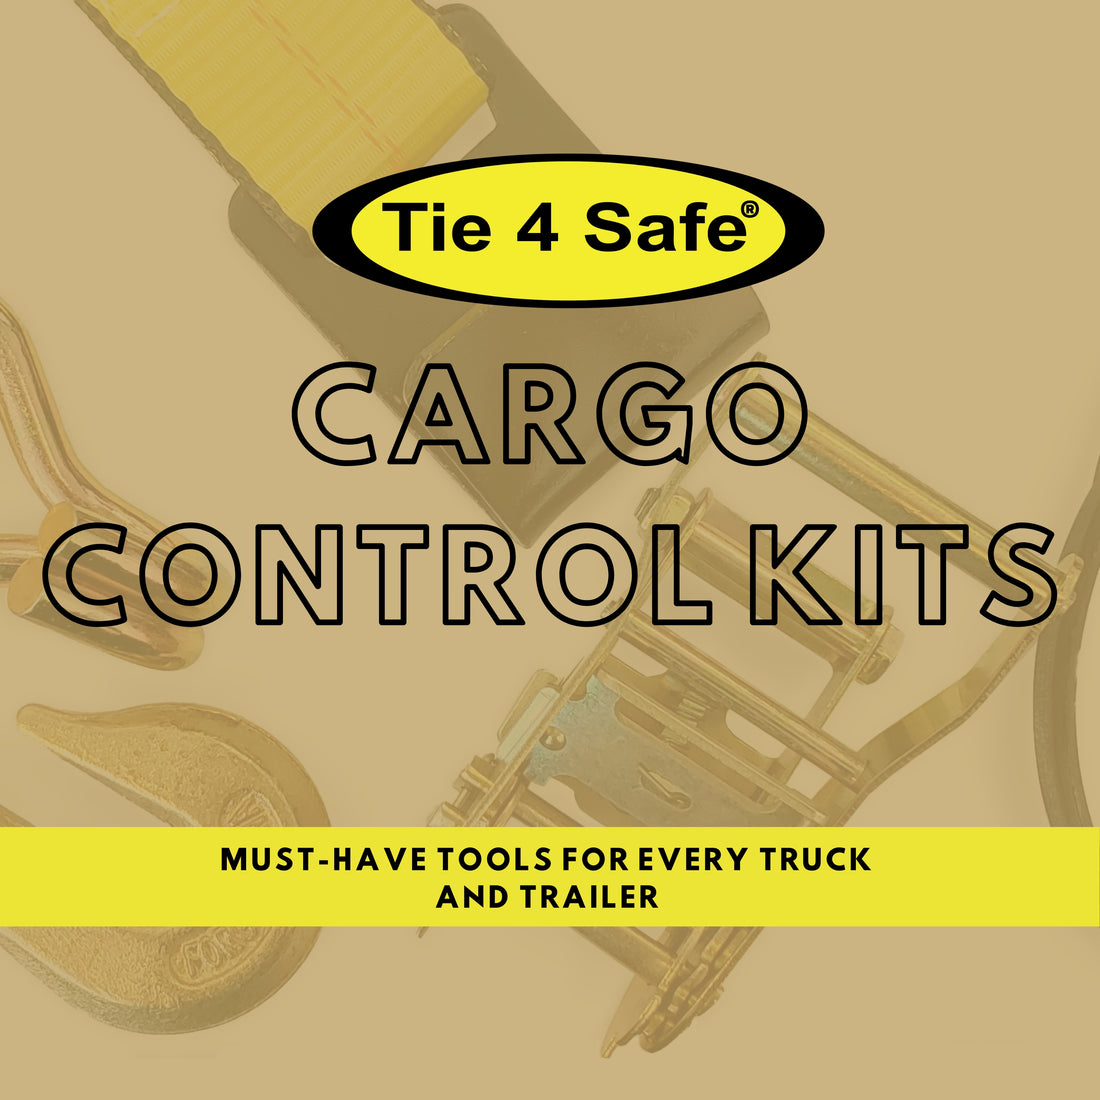 Cargo Control Kits: Must-Have Tools for Every Truck and Trailer